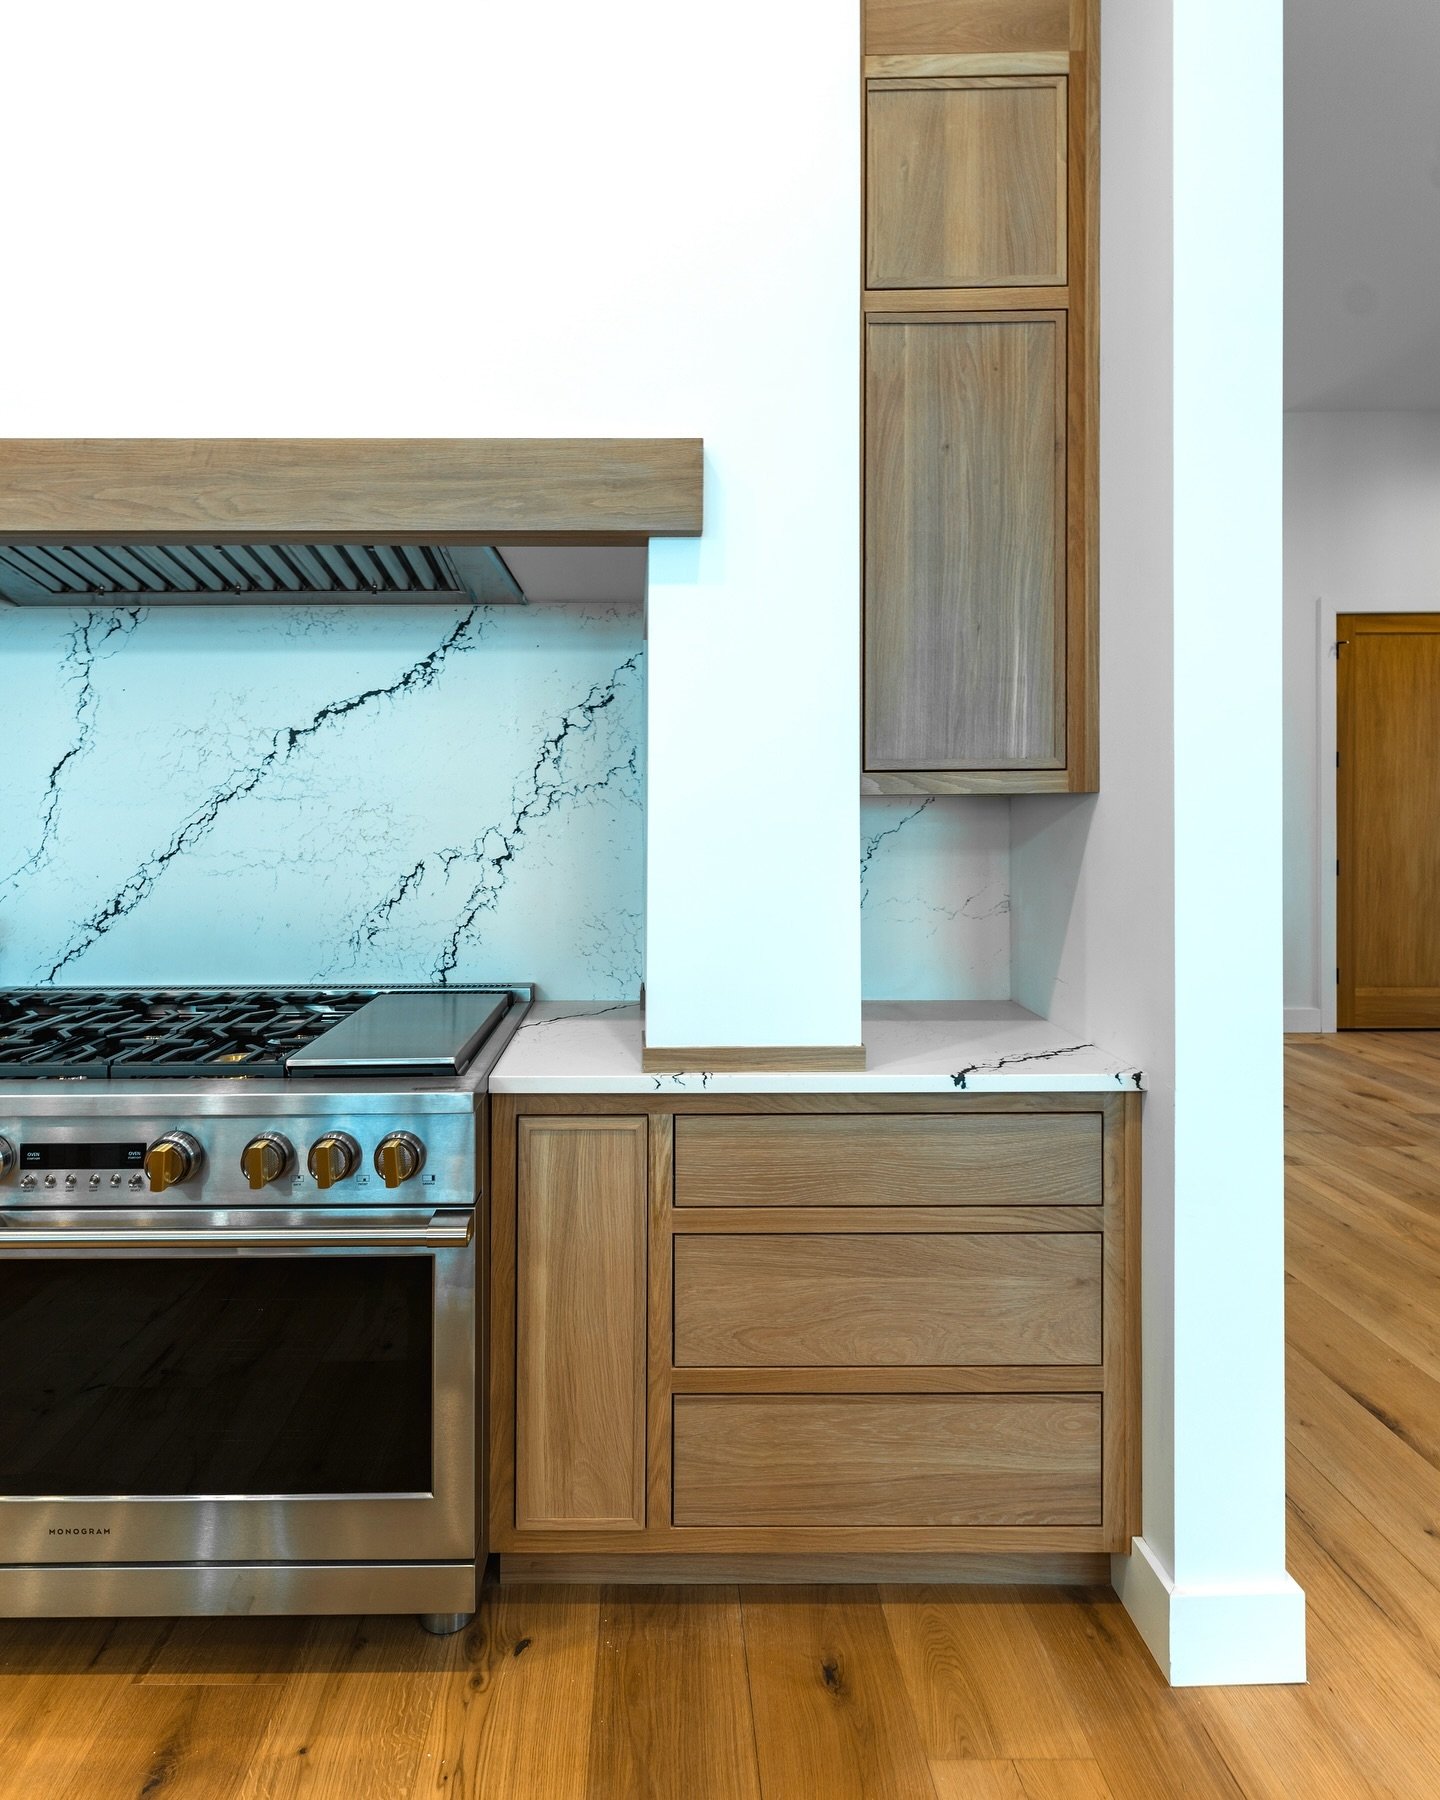 Clean kitchen details can make or break a home. This one is a winner. 

Design Selections: @nnbolka